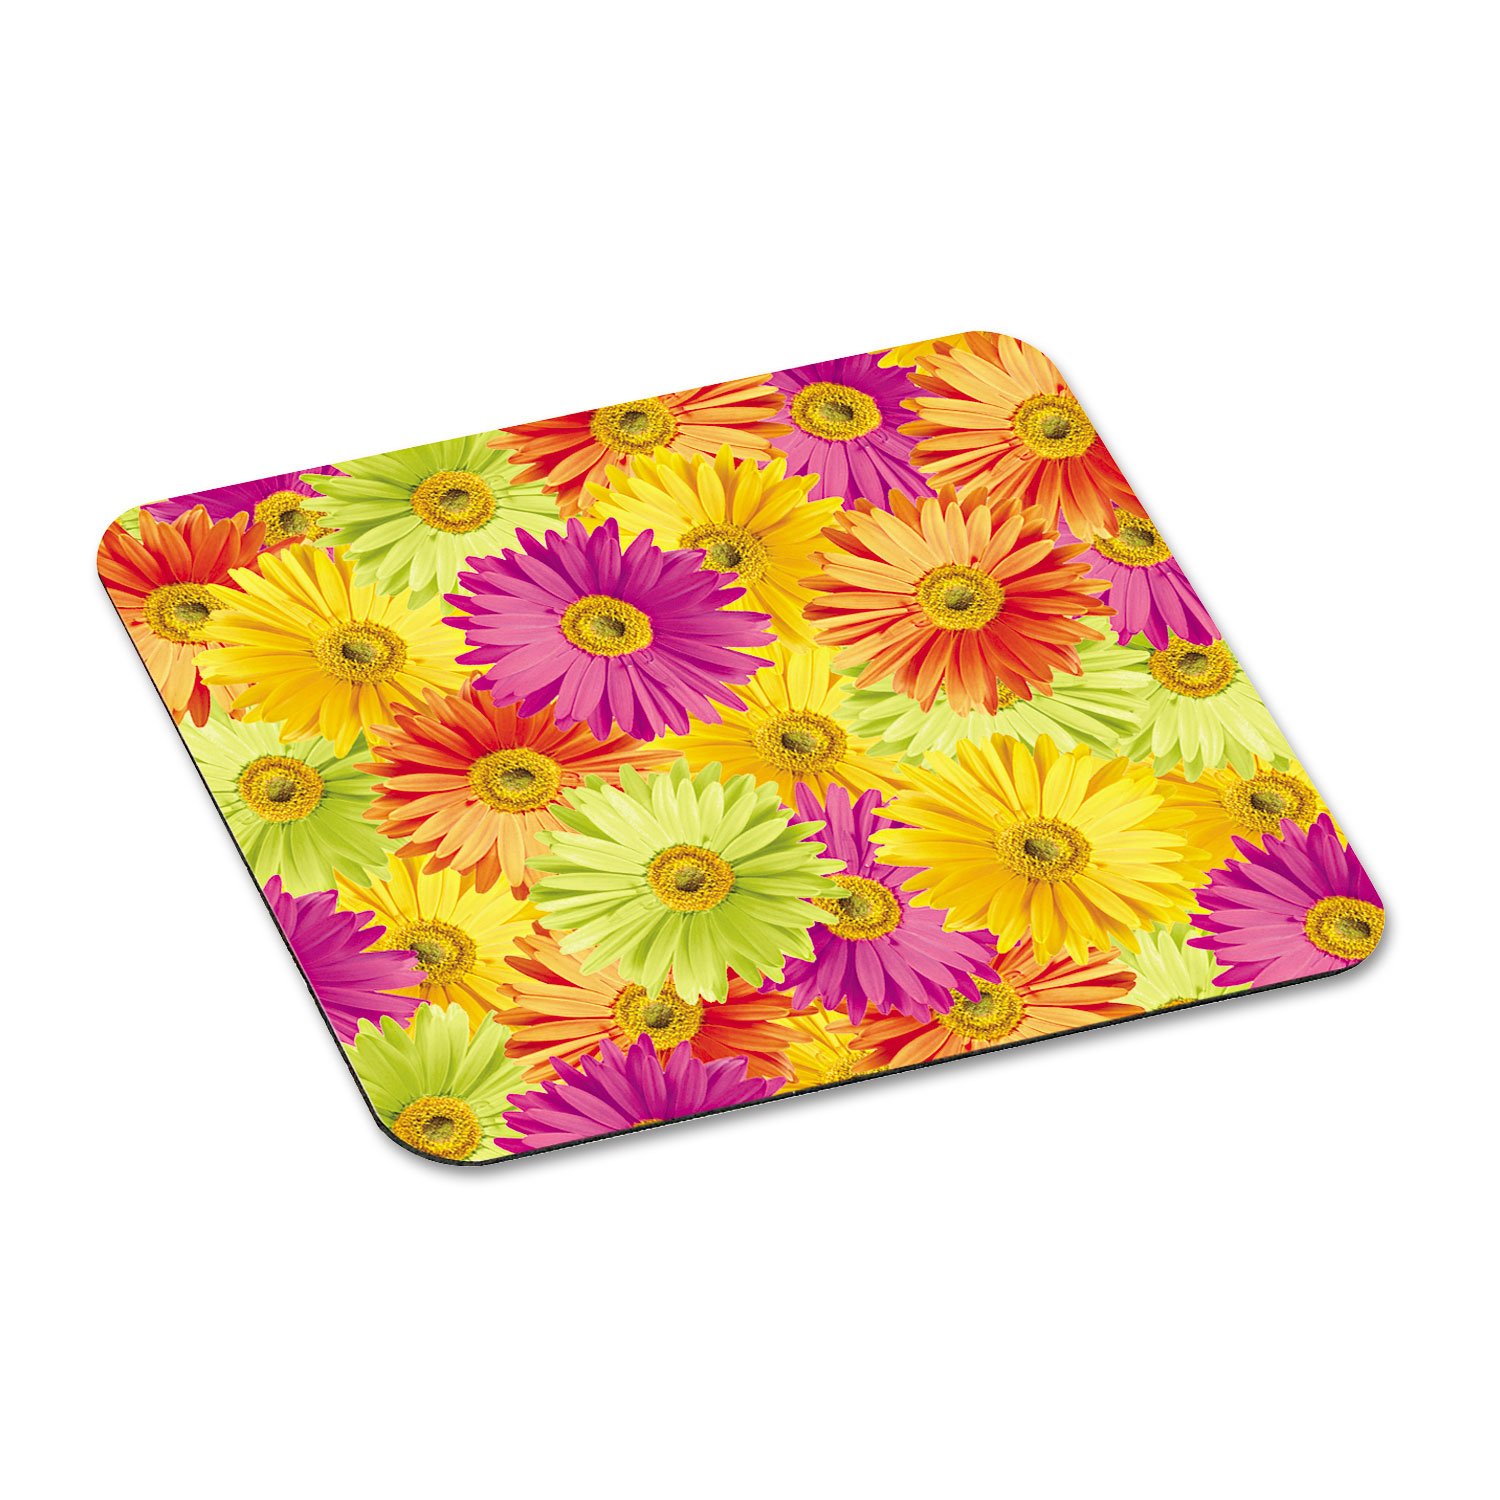  3M MP114DS Mouse Pad with Precise Mousing Surface, 9 x 8 x 1/8, Daisy Design (MMMMP114DS) 